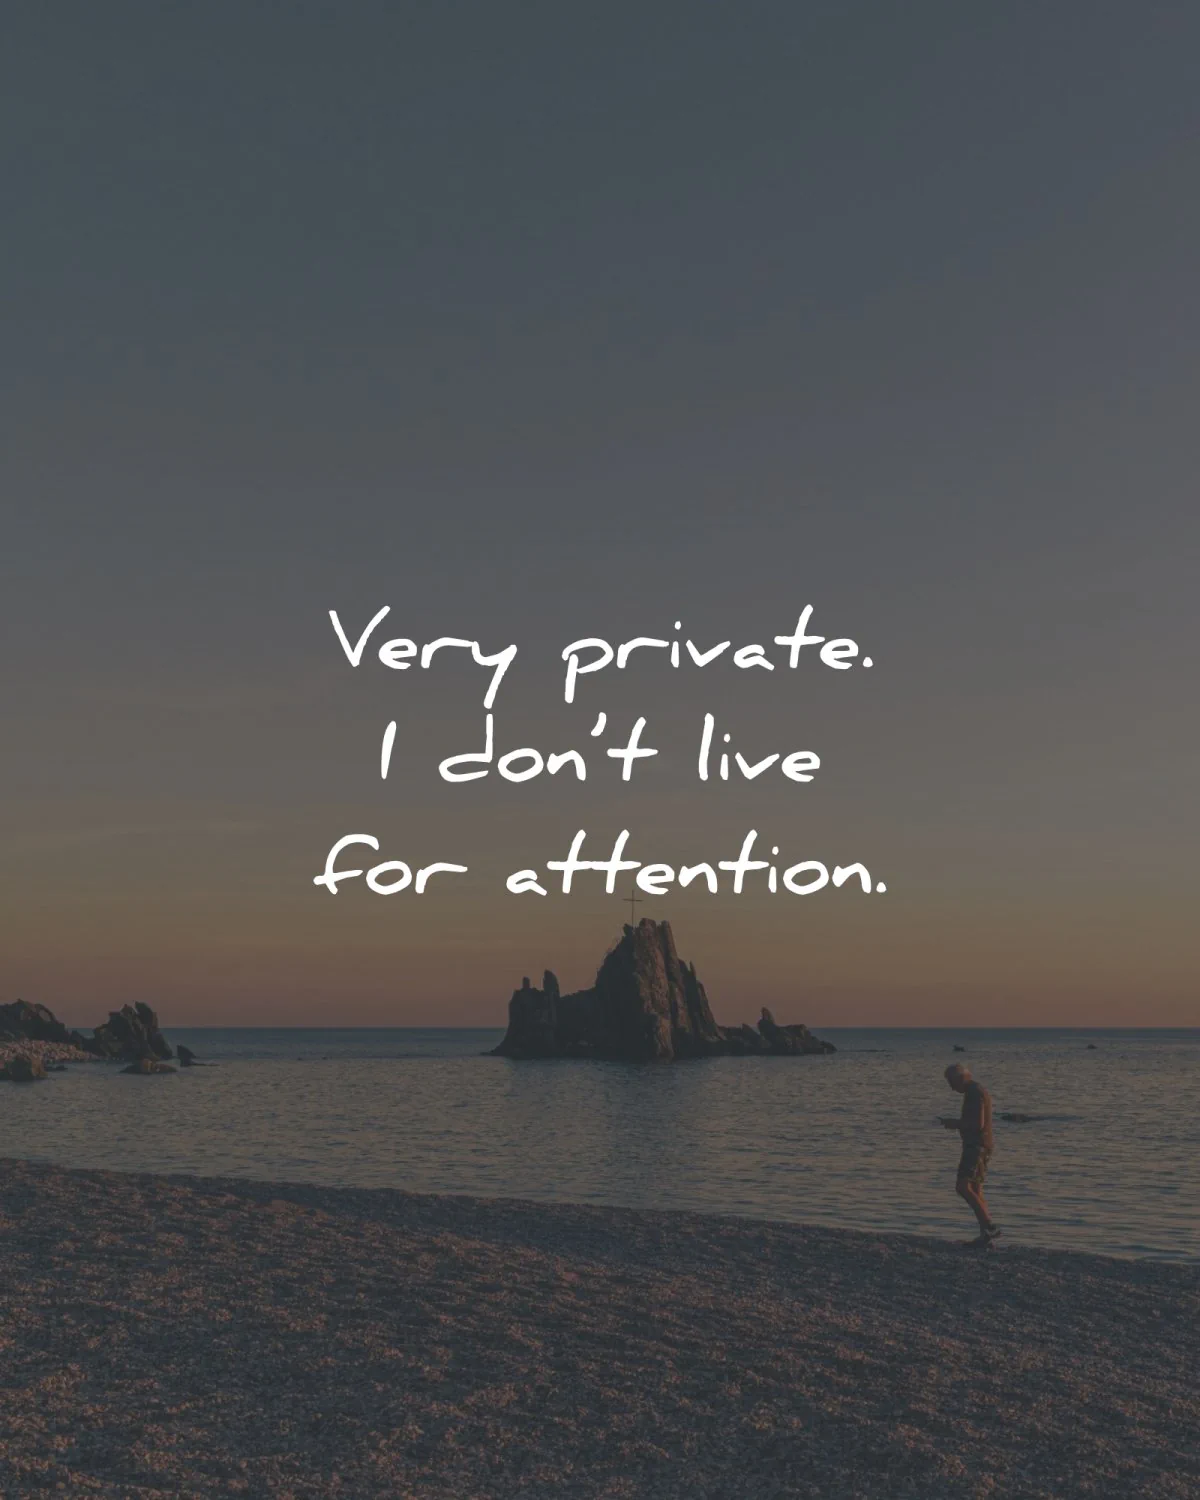 infj quotes very private live attention wisdom